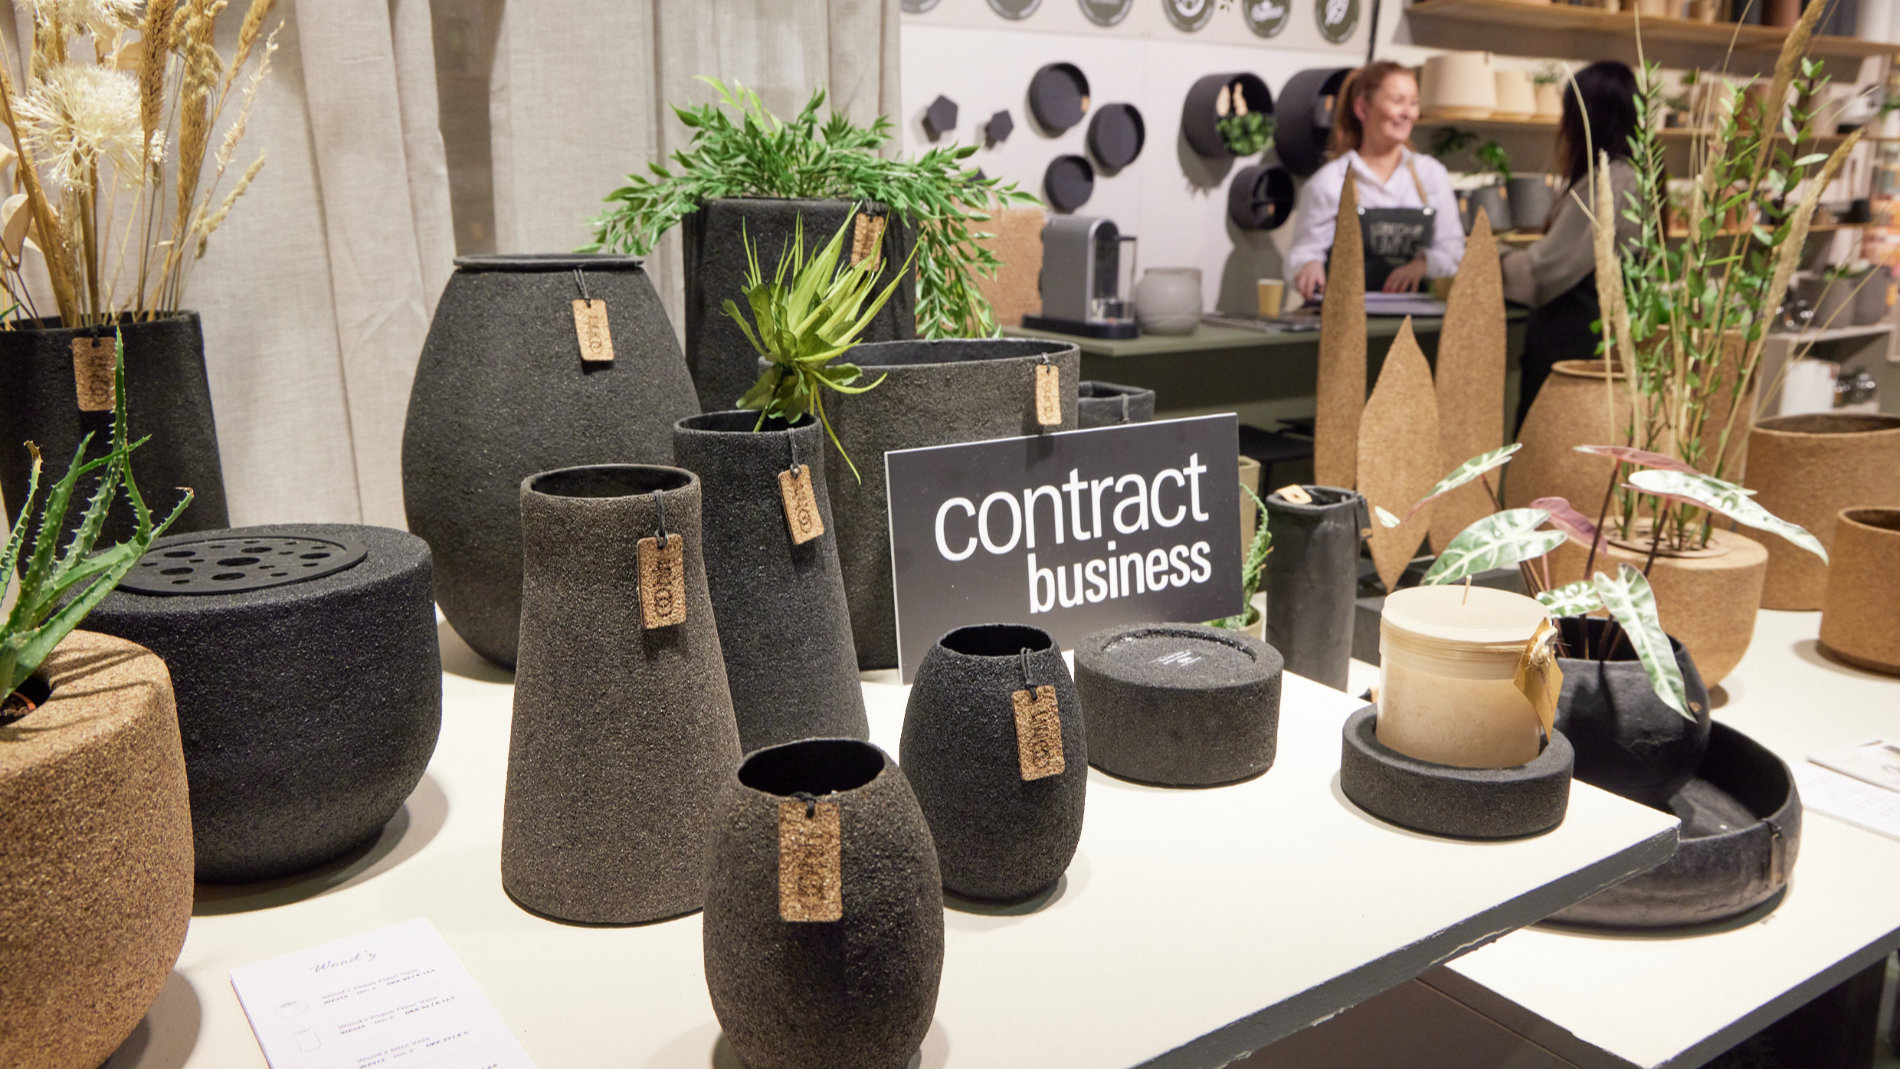 Contract Business exhibitor at Ambiente